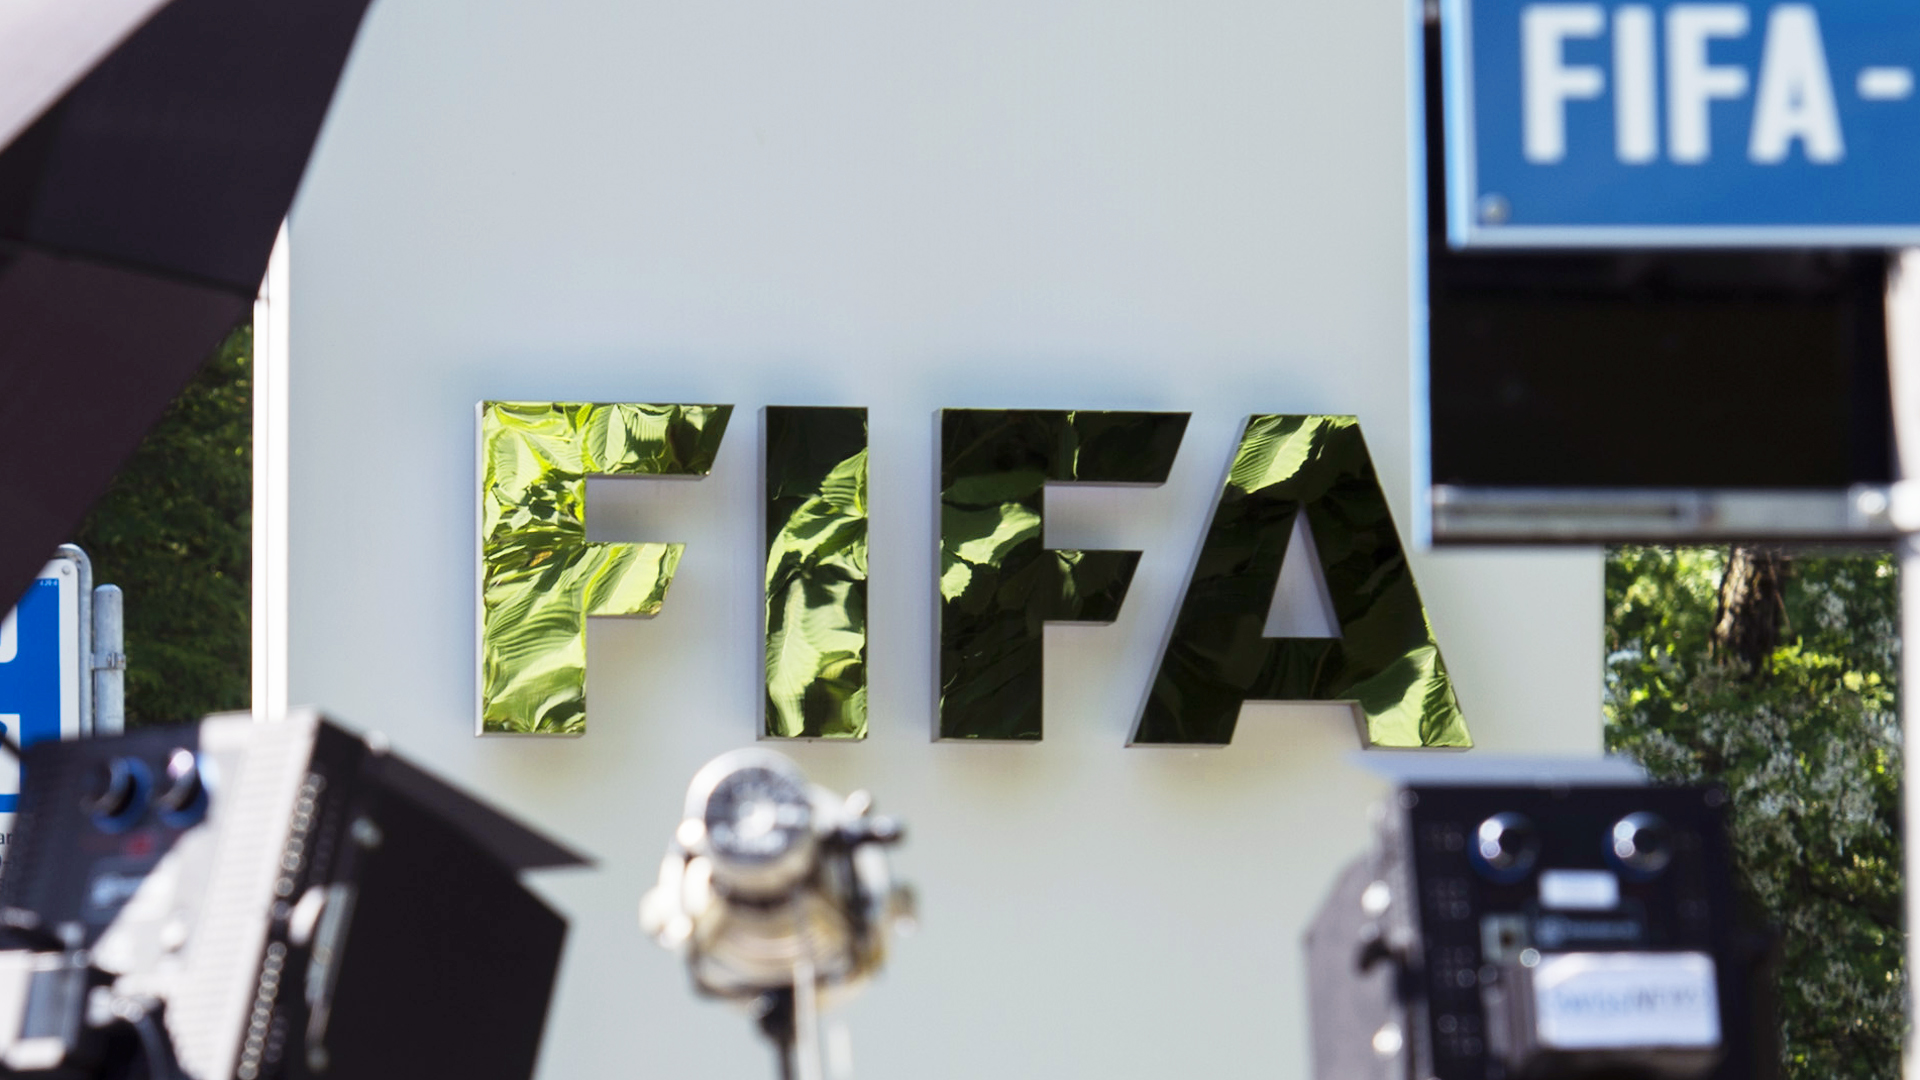 Hong Kong's role in the Fifa scandal emerged when US justice officials alleged at least one senior Fifa official had funnelled bribes through a bank account in the city. Photo: AP